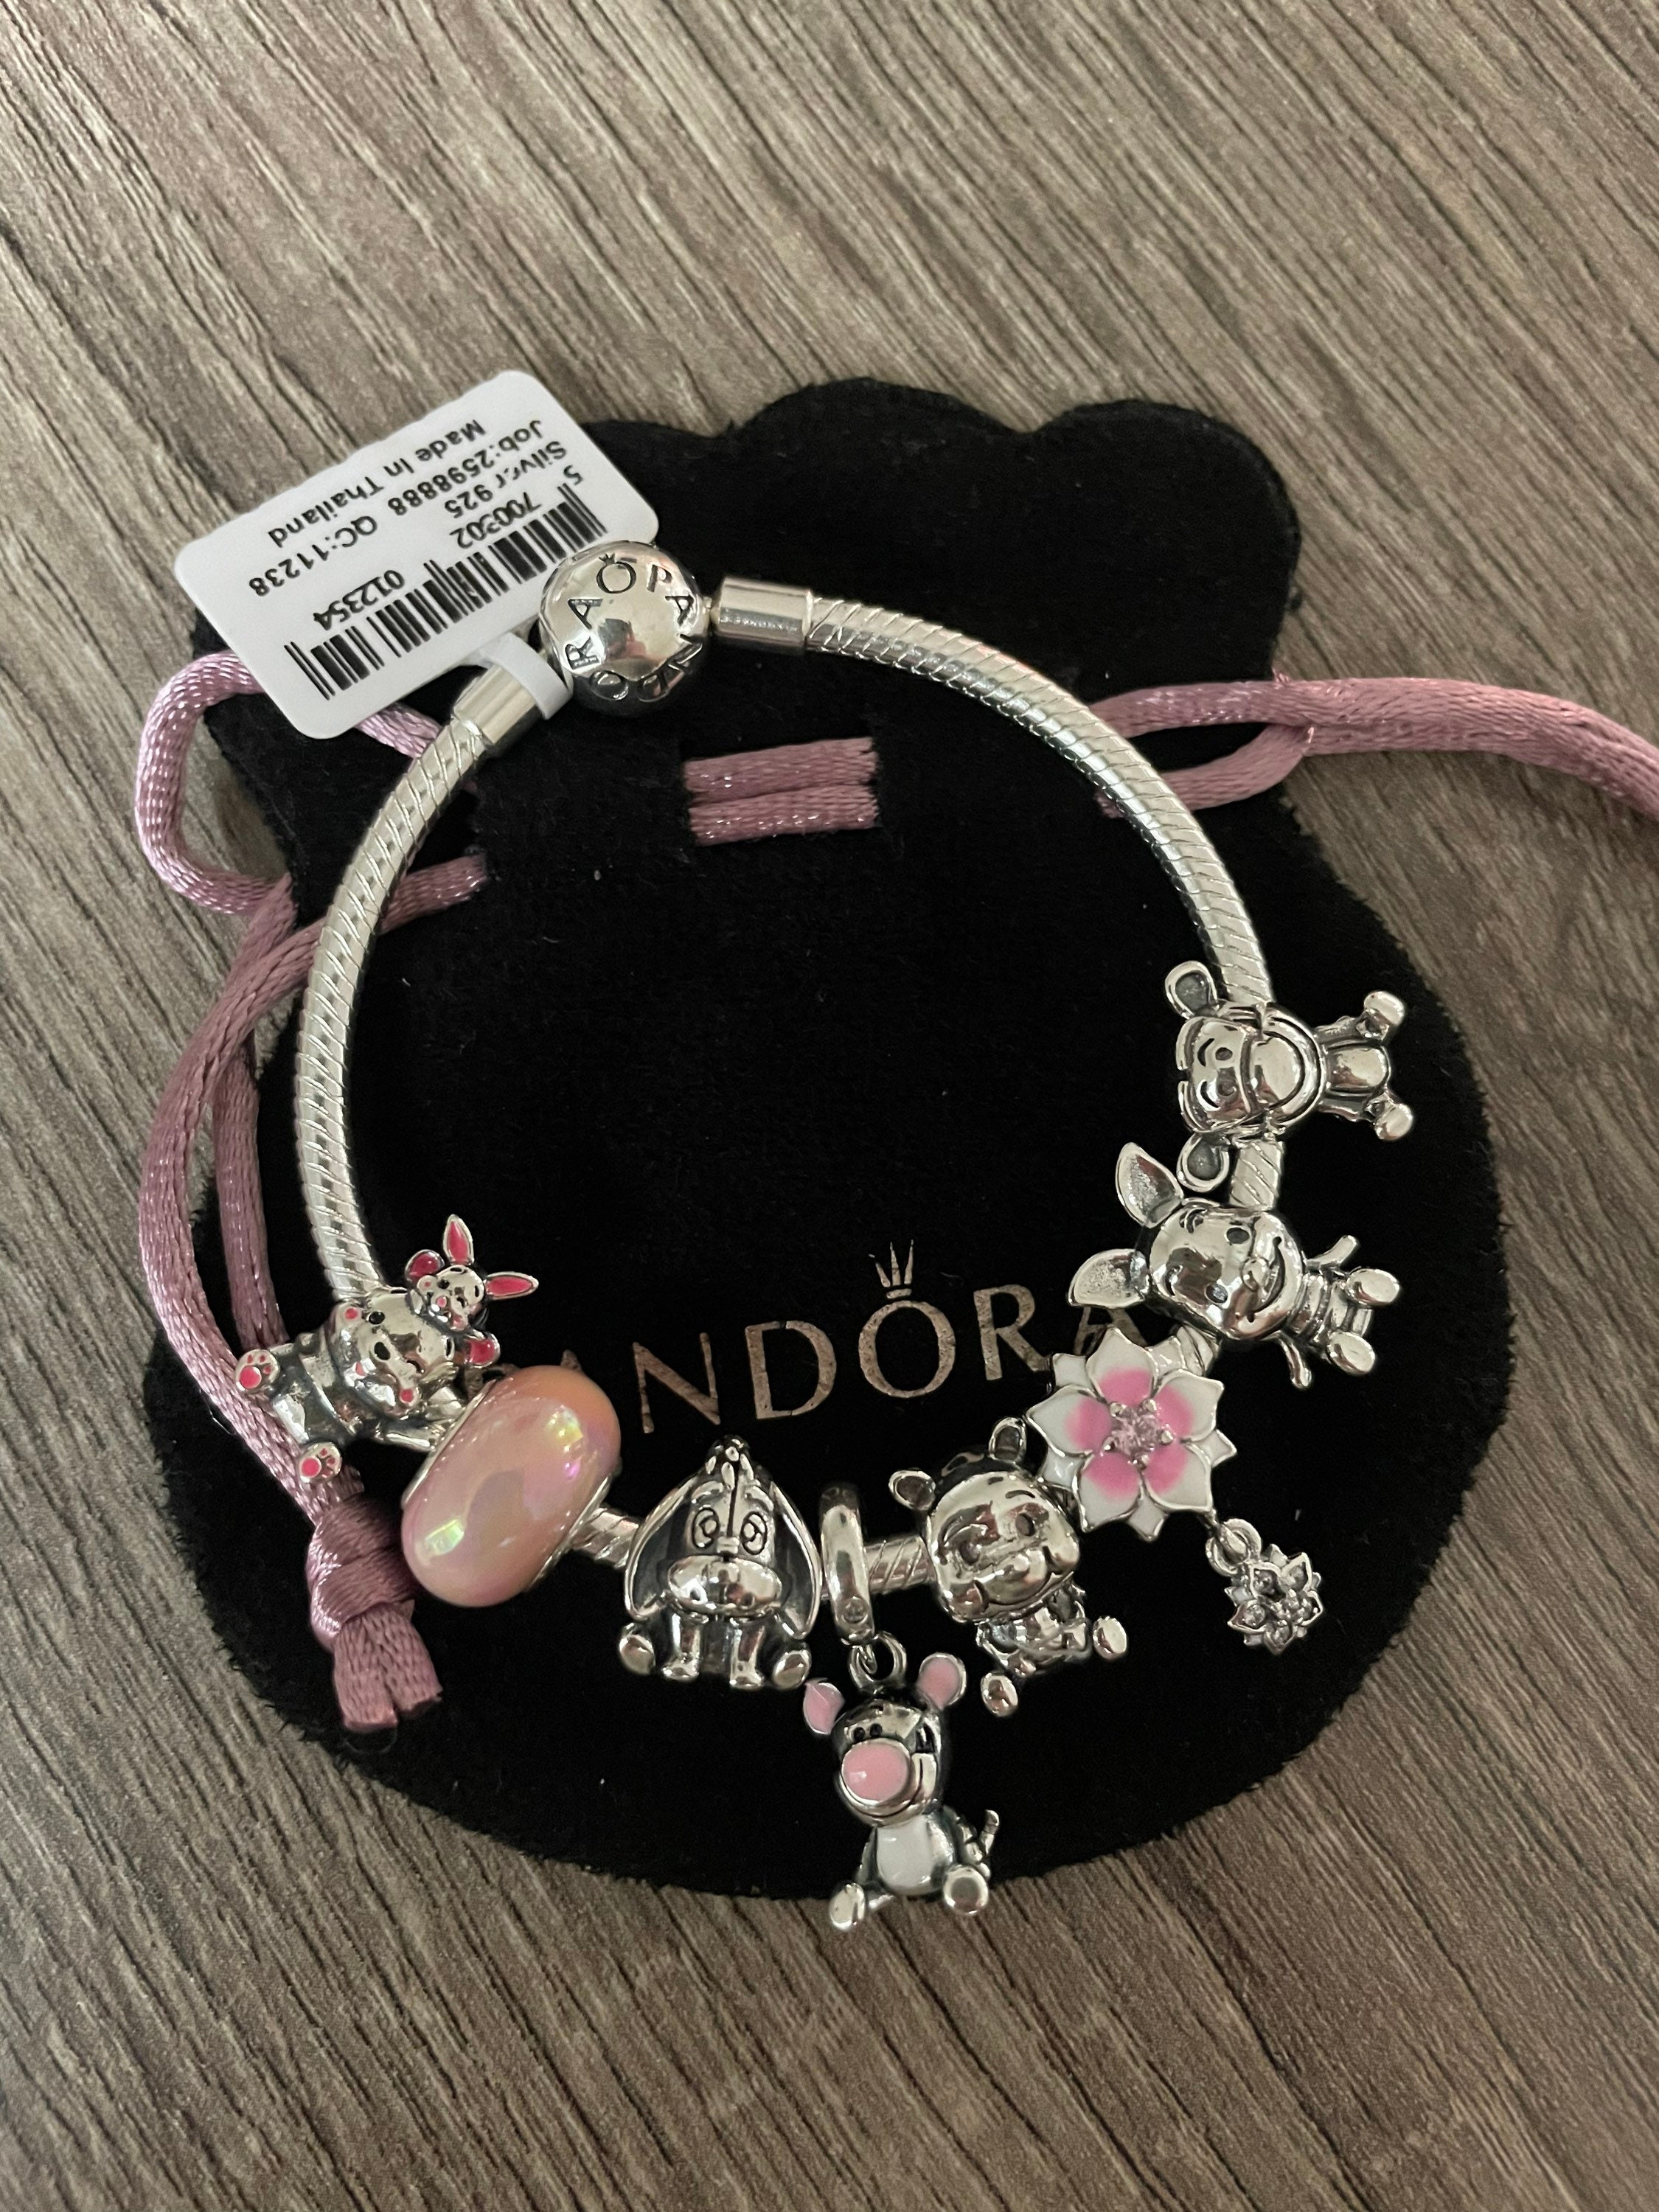 Pandora Bracelet with Pink Character Themed Charms